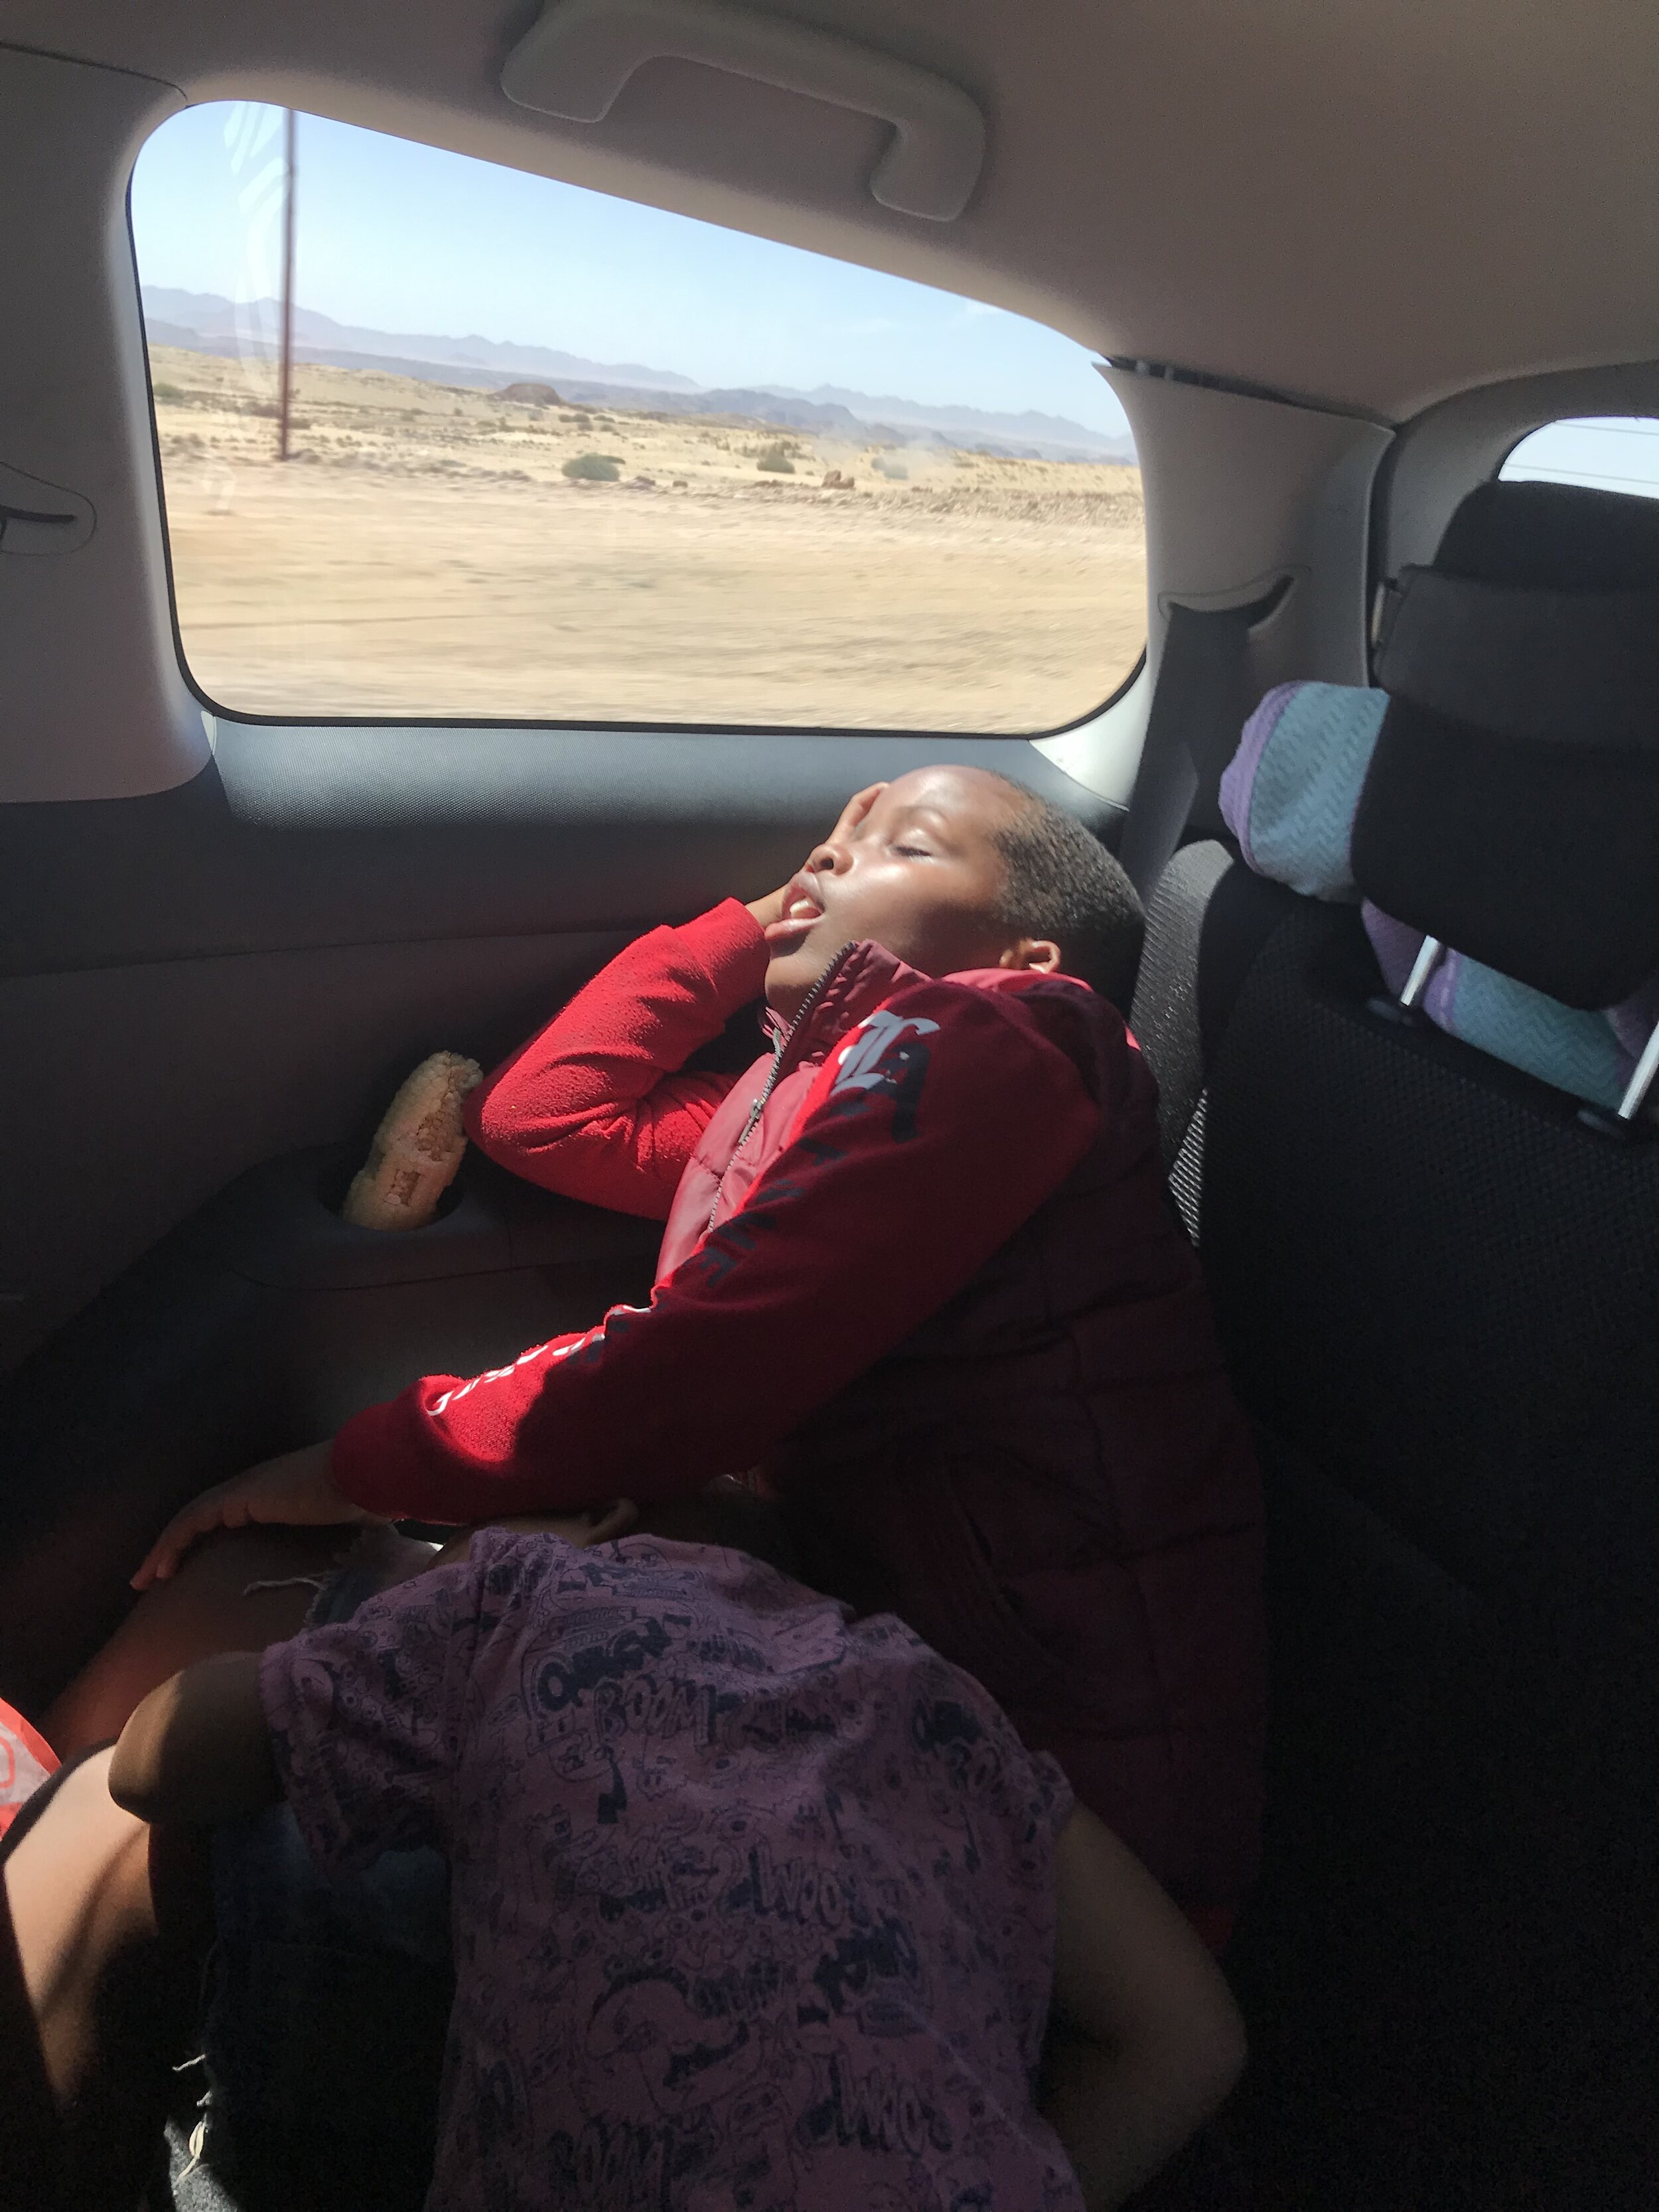  More of the locals - two boys taking a nap on the 4-hour bus ride back to Windhoek. 